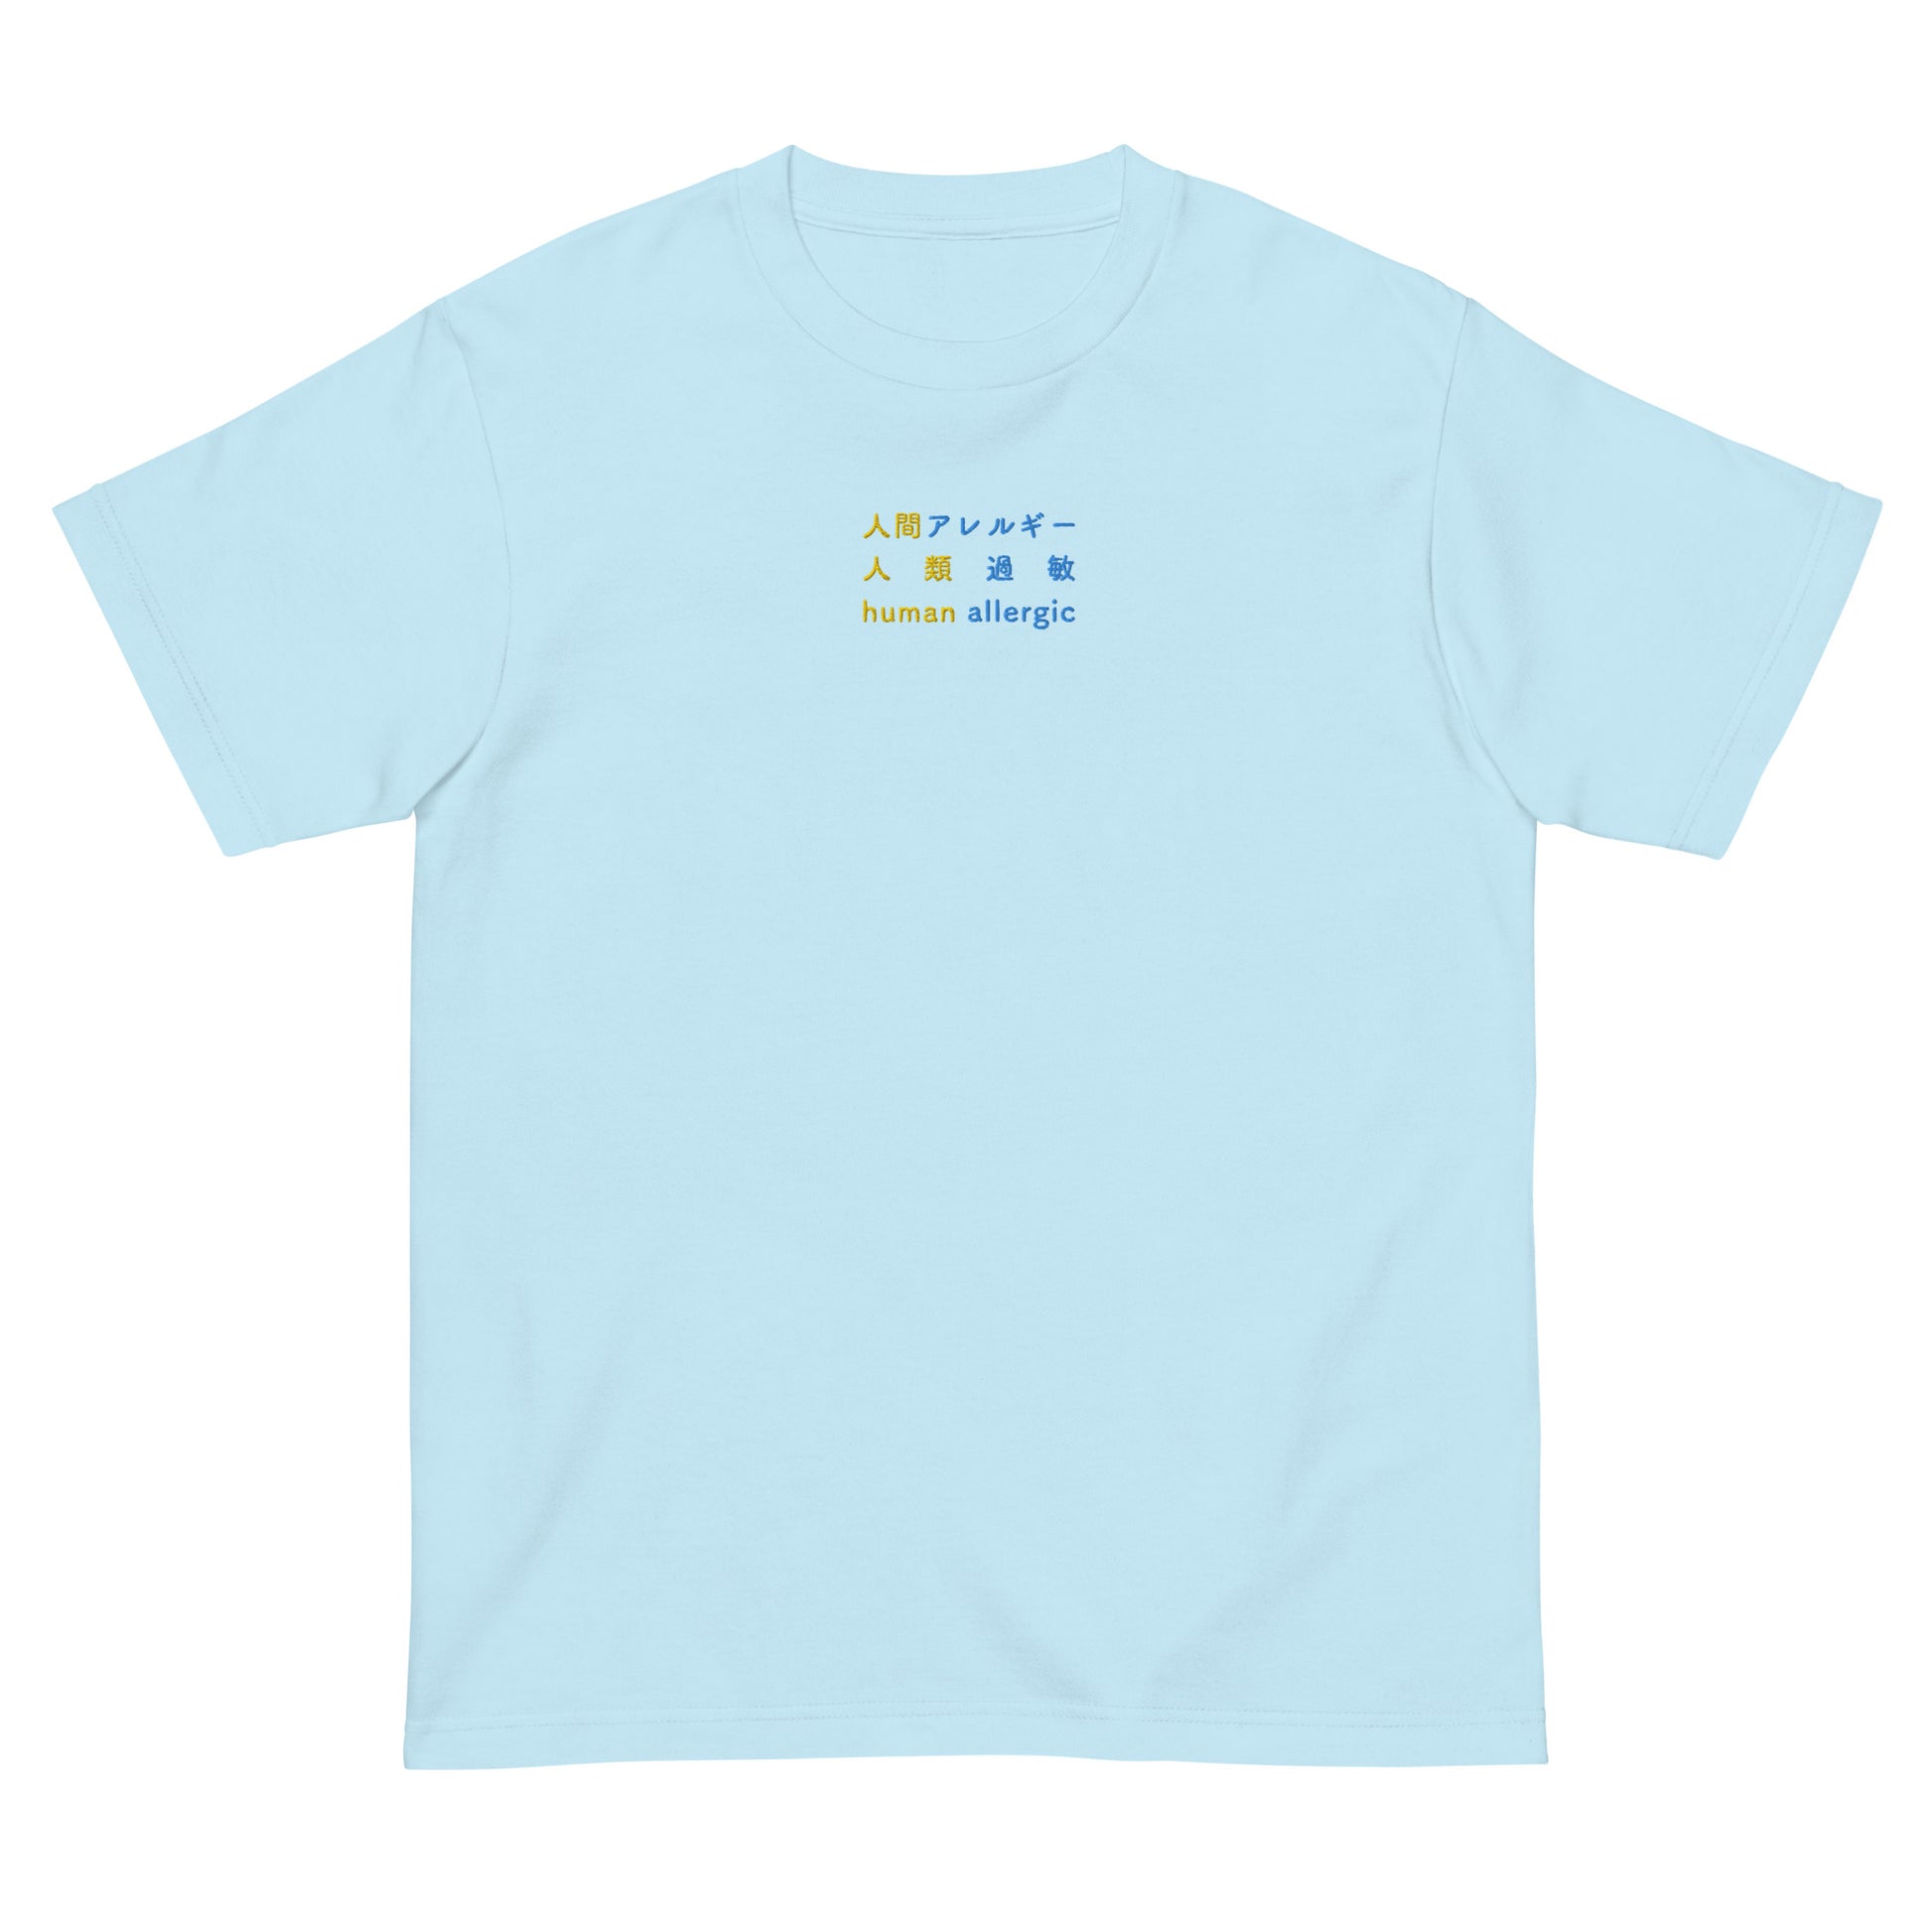 Light Blue High Quality Tee - Front Design with an Yellow, Blue Embroidery "Human Allergic" in Japanese,Chinese and English